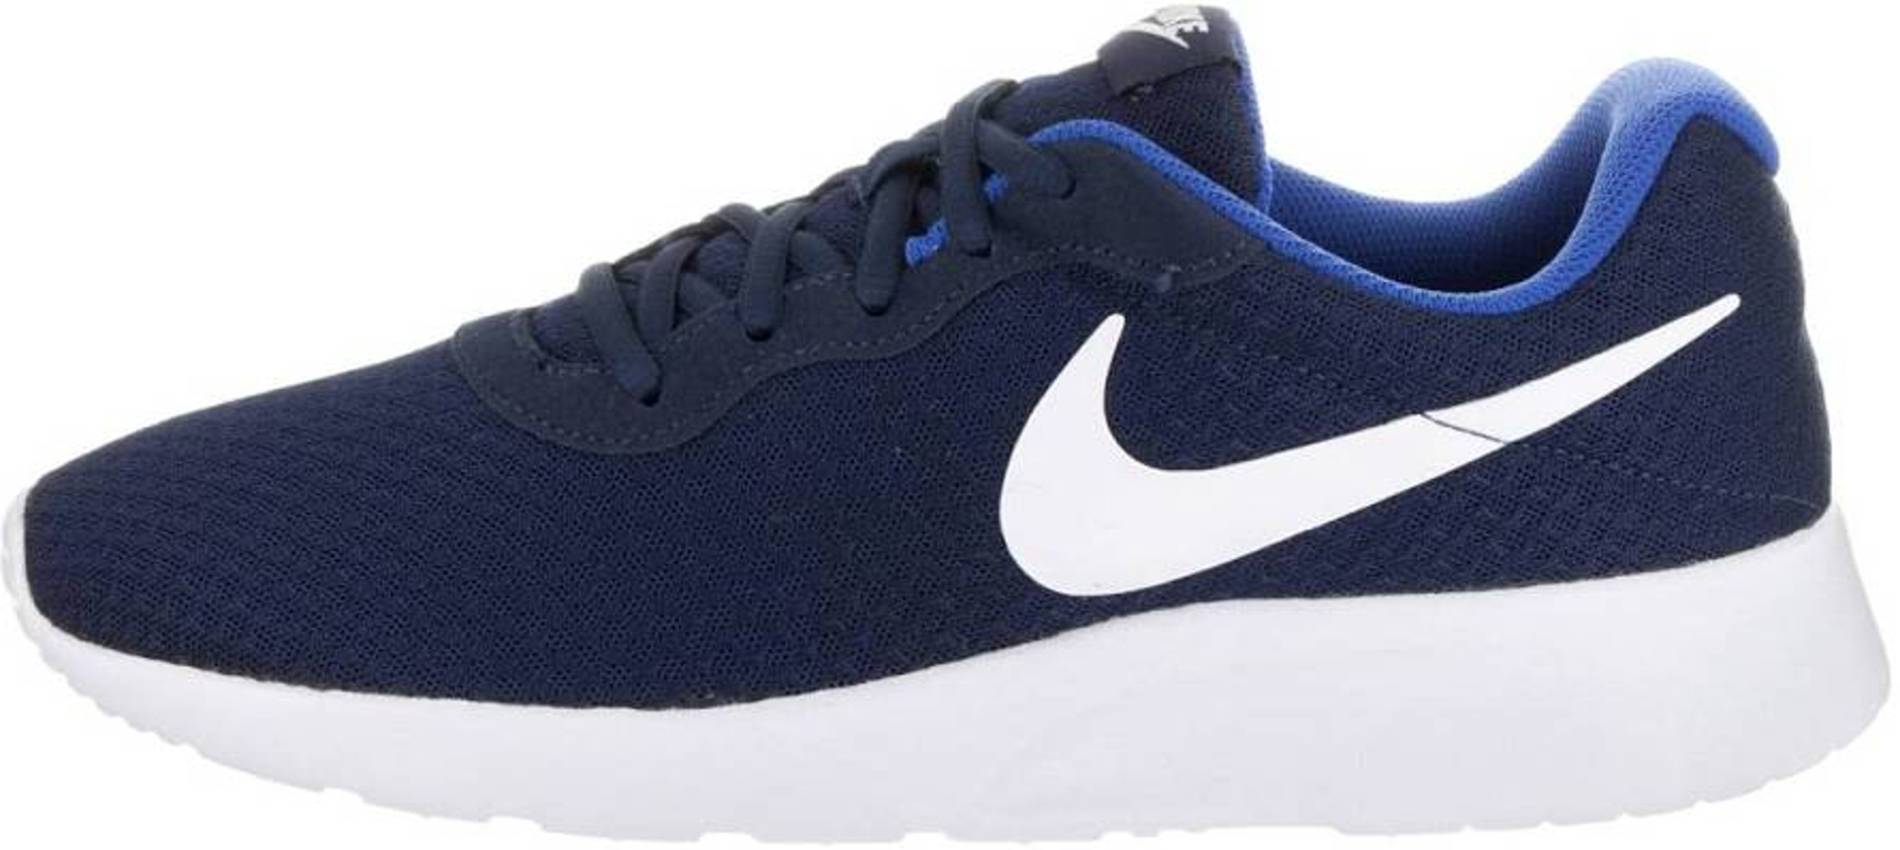 Save 39% on Blue Nike Sneakers (131 